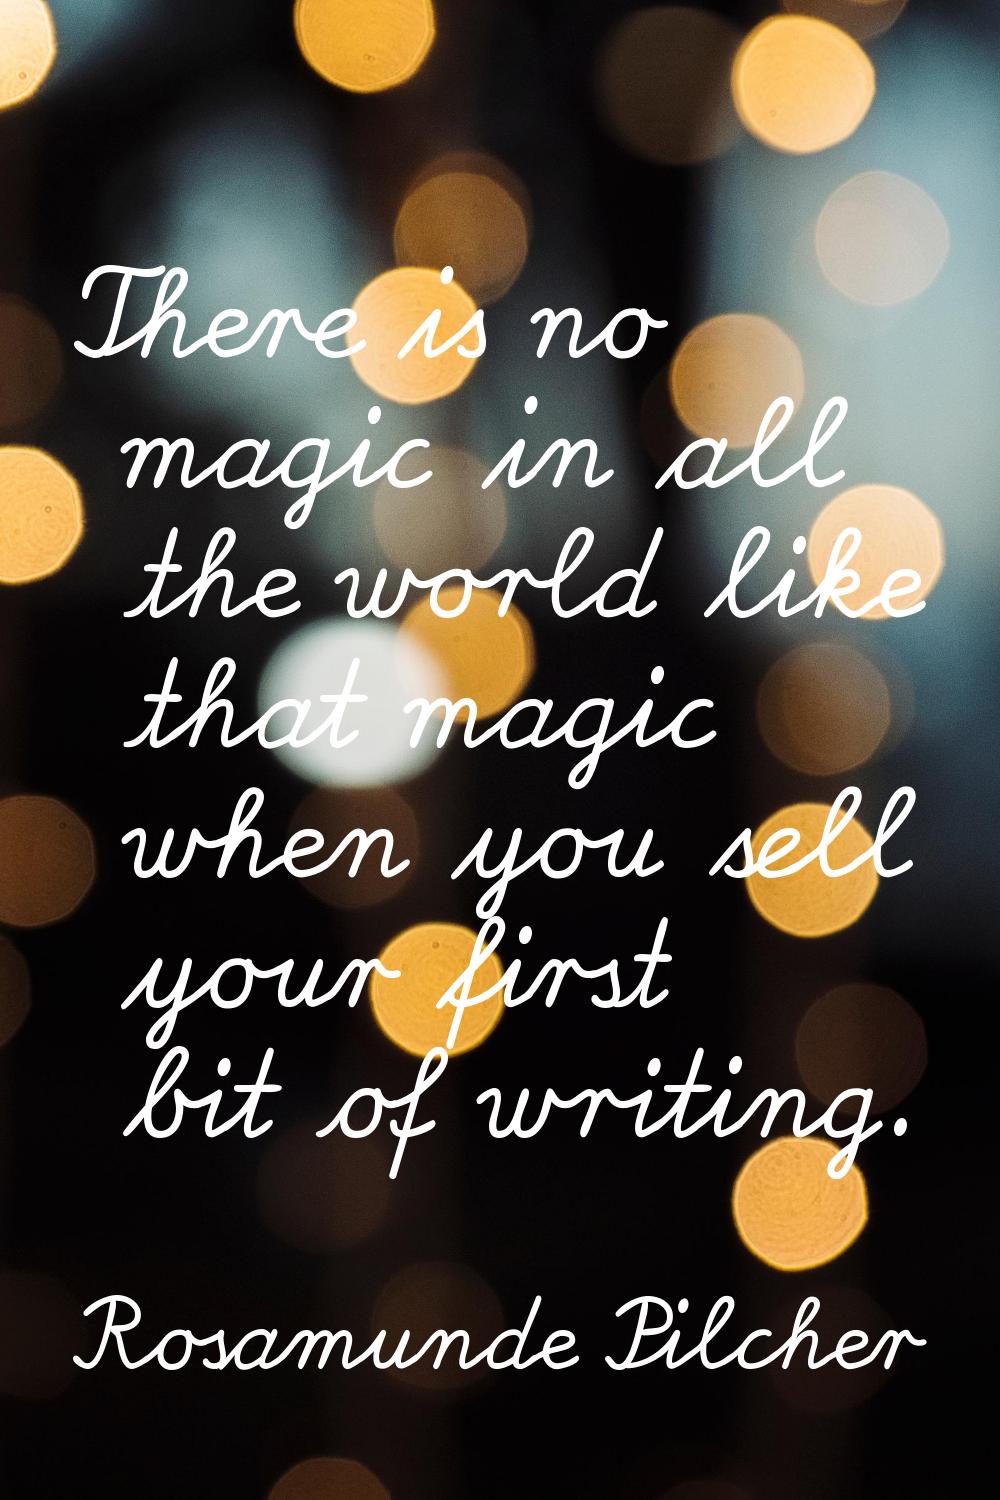 There is no magic in all the world like that magic when you sell your first bit of writing.